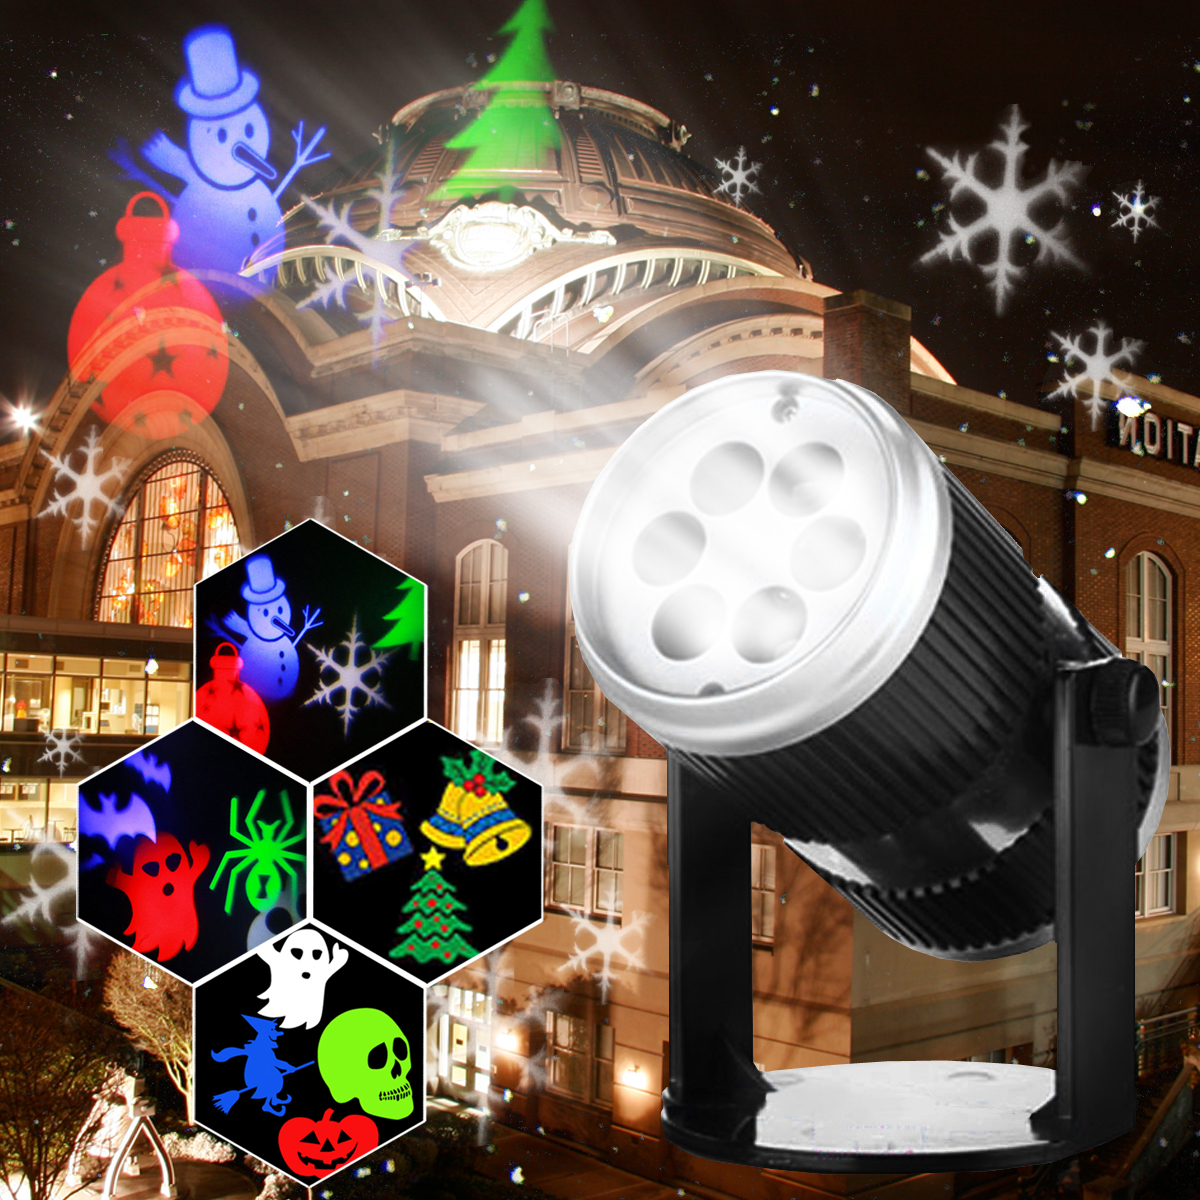 6-Patterns-4W-LED-Stage-Light-Projector-Lamp-Landscape-Garden-Decor-for-Halloween-Christmas-Decorati-1193828-1